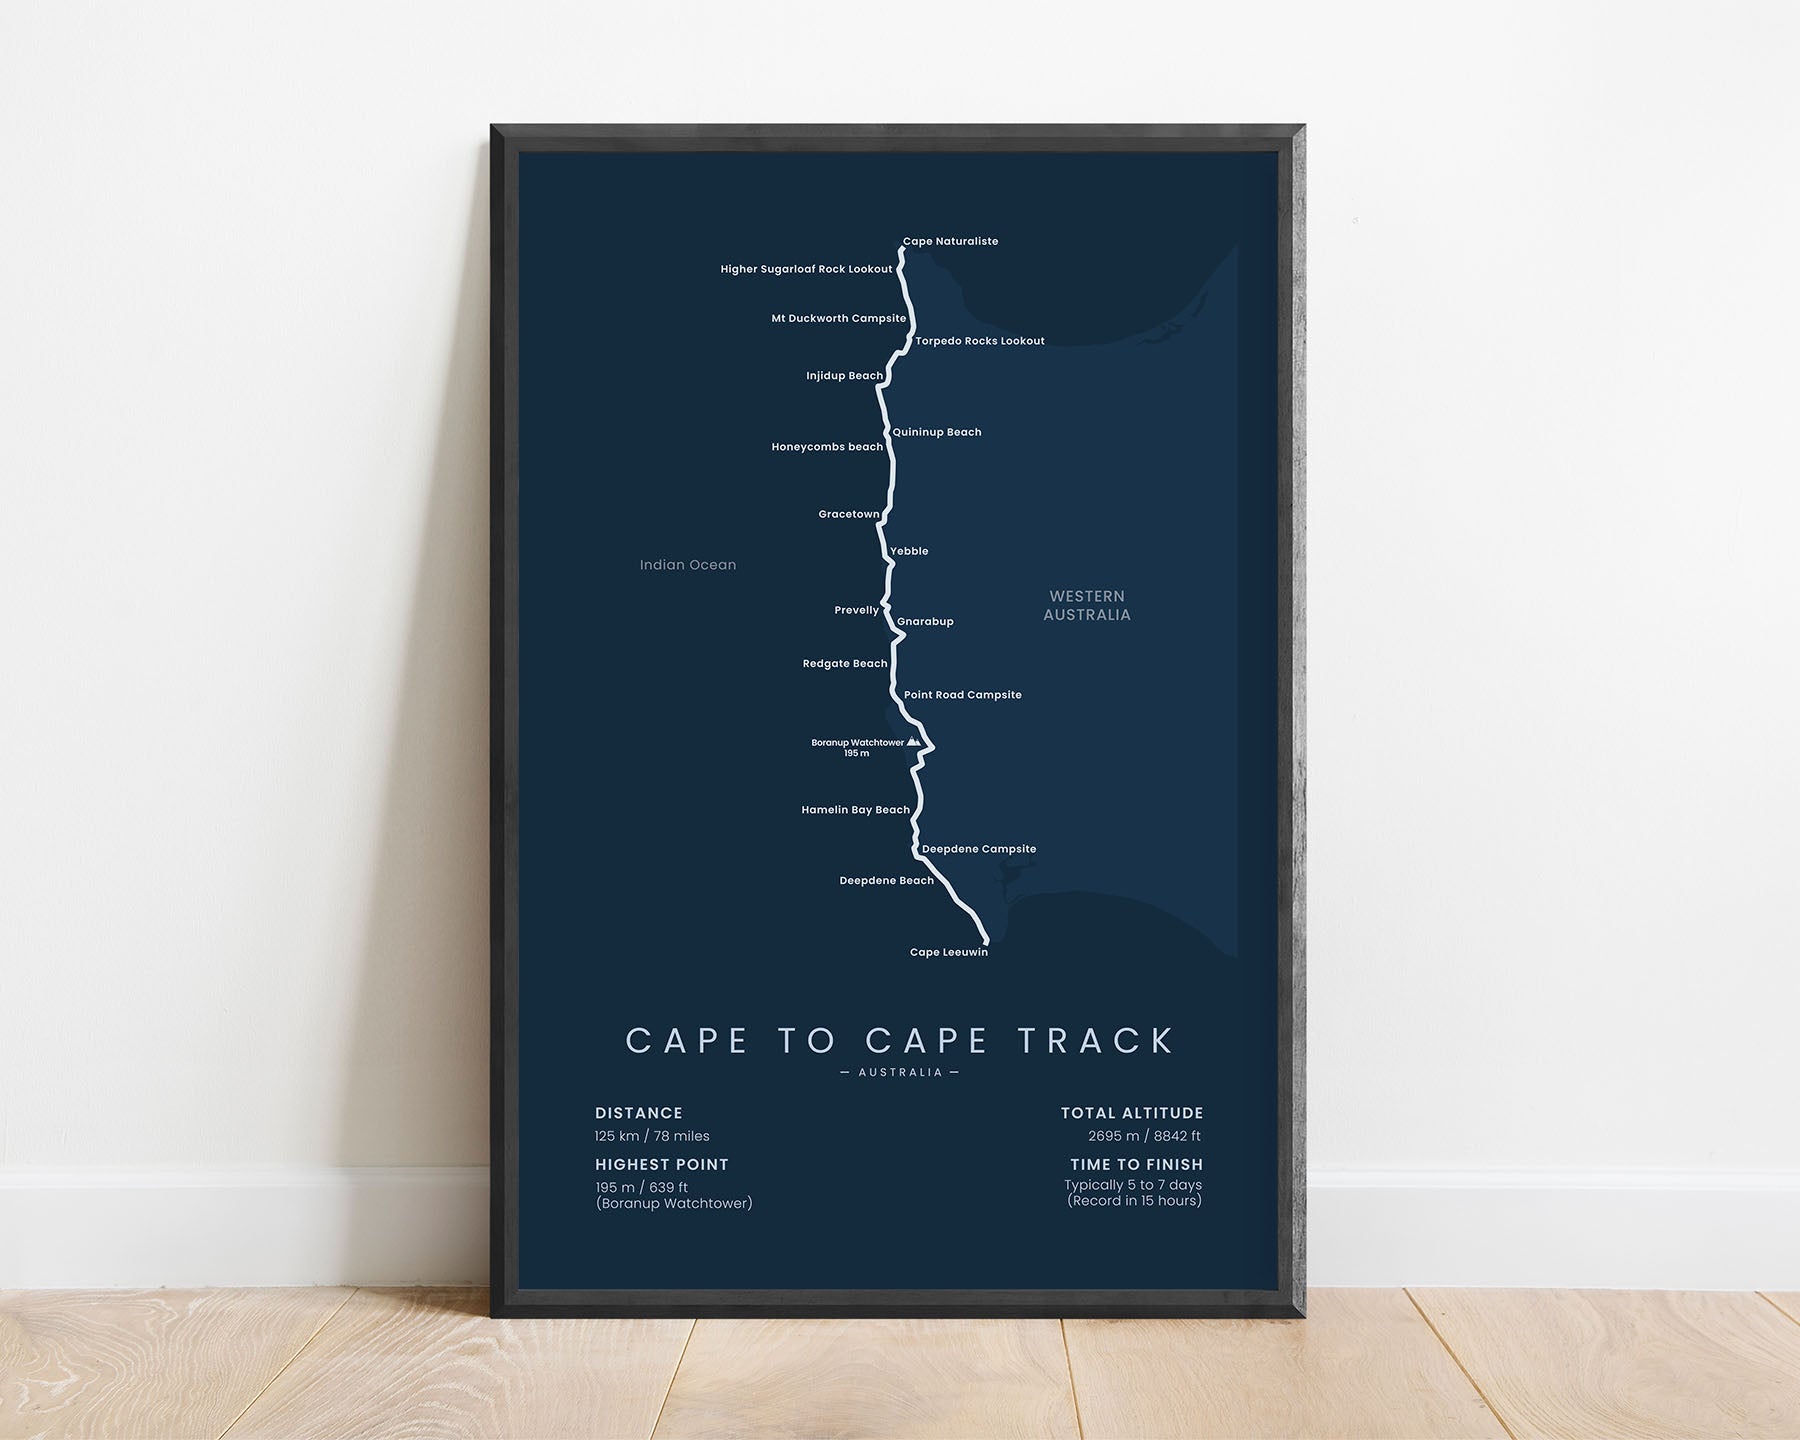 Cape to Cape Track (Leeuwin-Naturaliste National Park) trek print with blue background